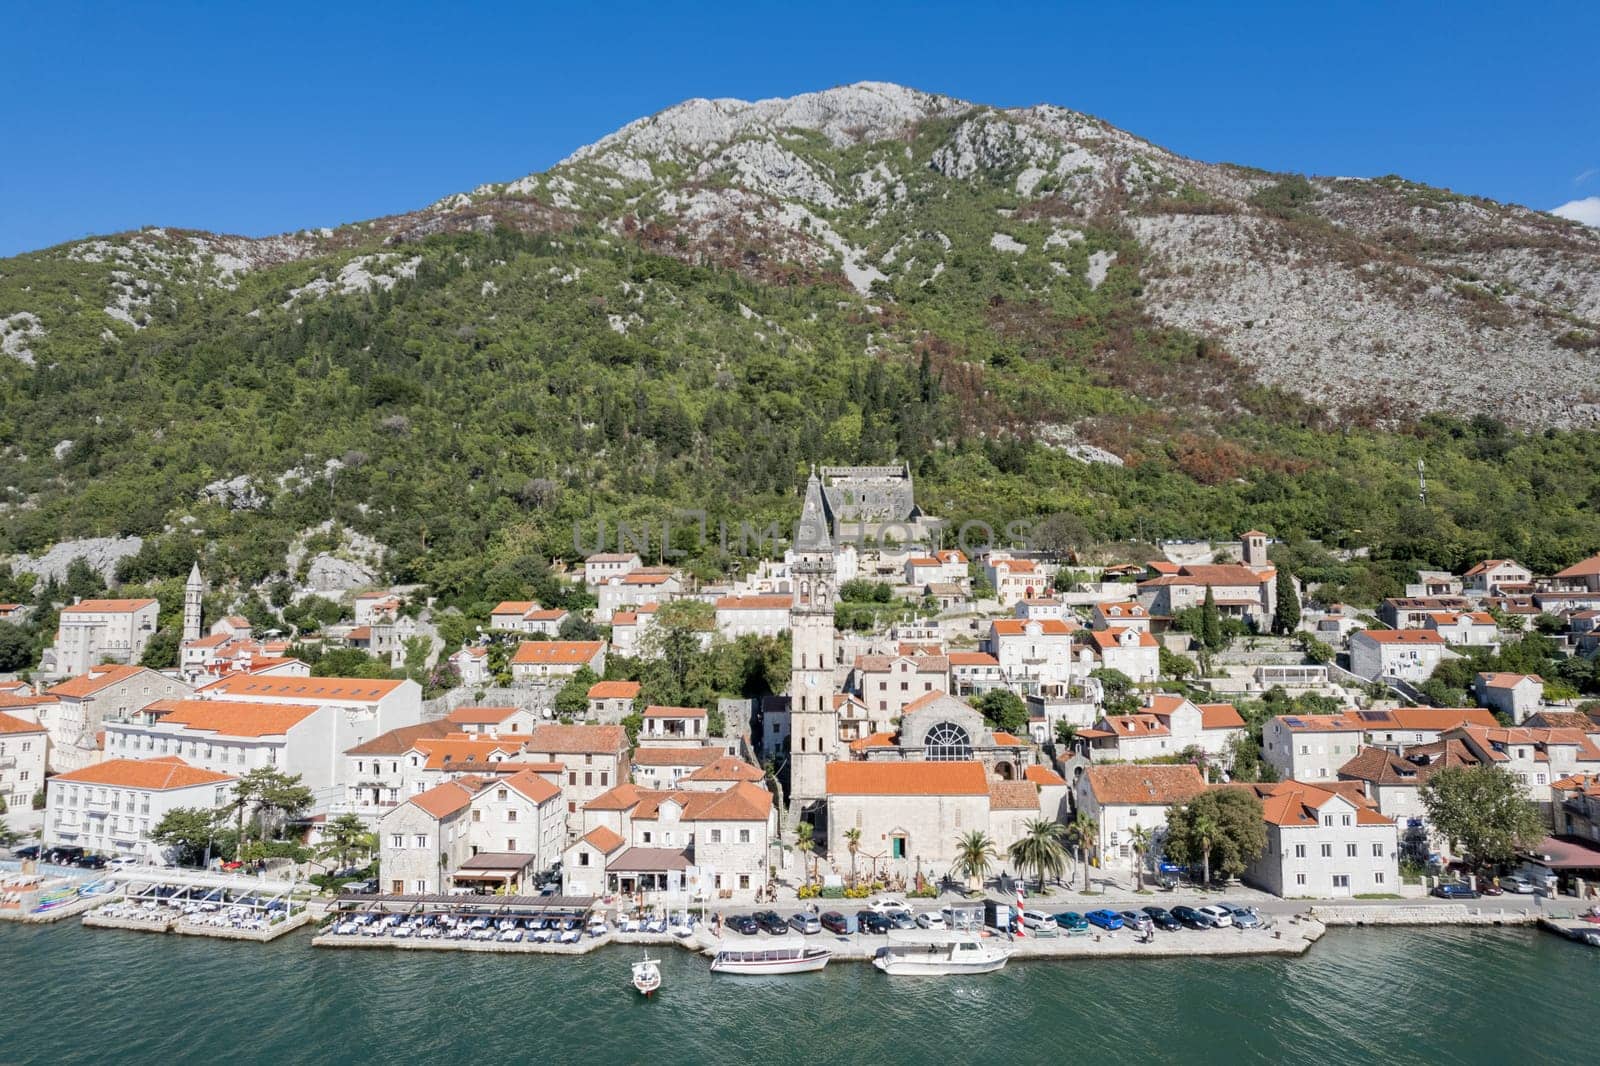 Motor boats stand off the coast of Perast against the backdrop of the Church of St. Nicholas and ancient houses. Montenegro. High quality photo